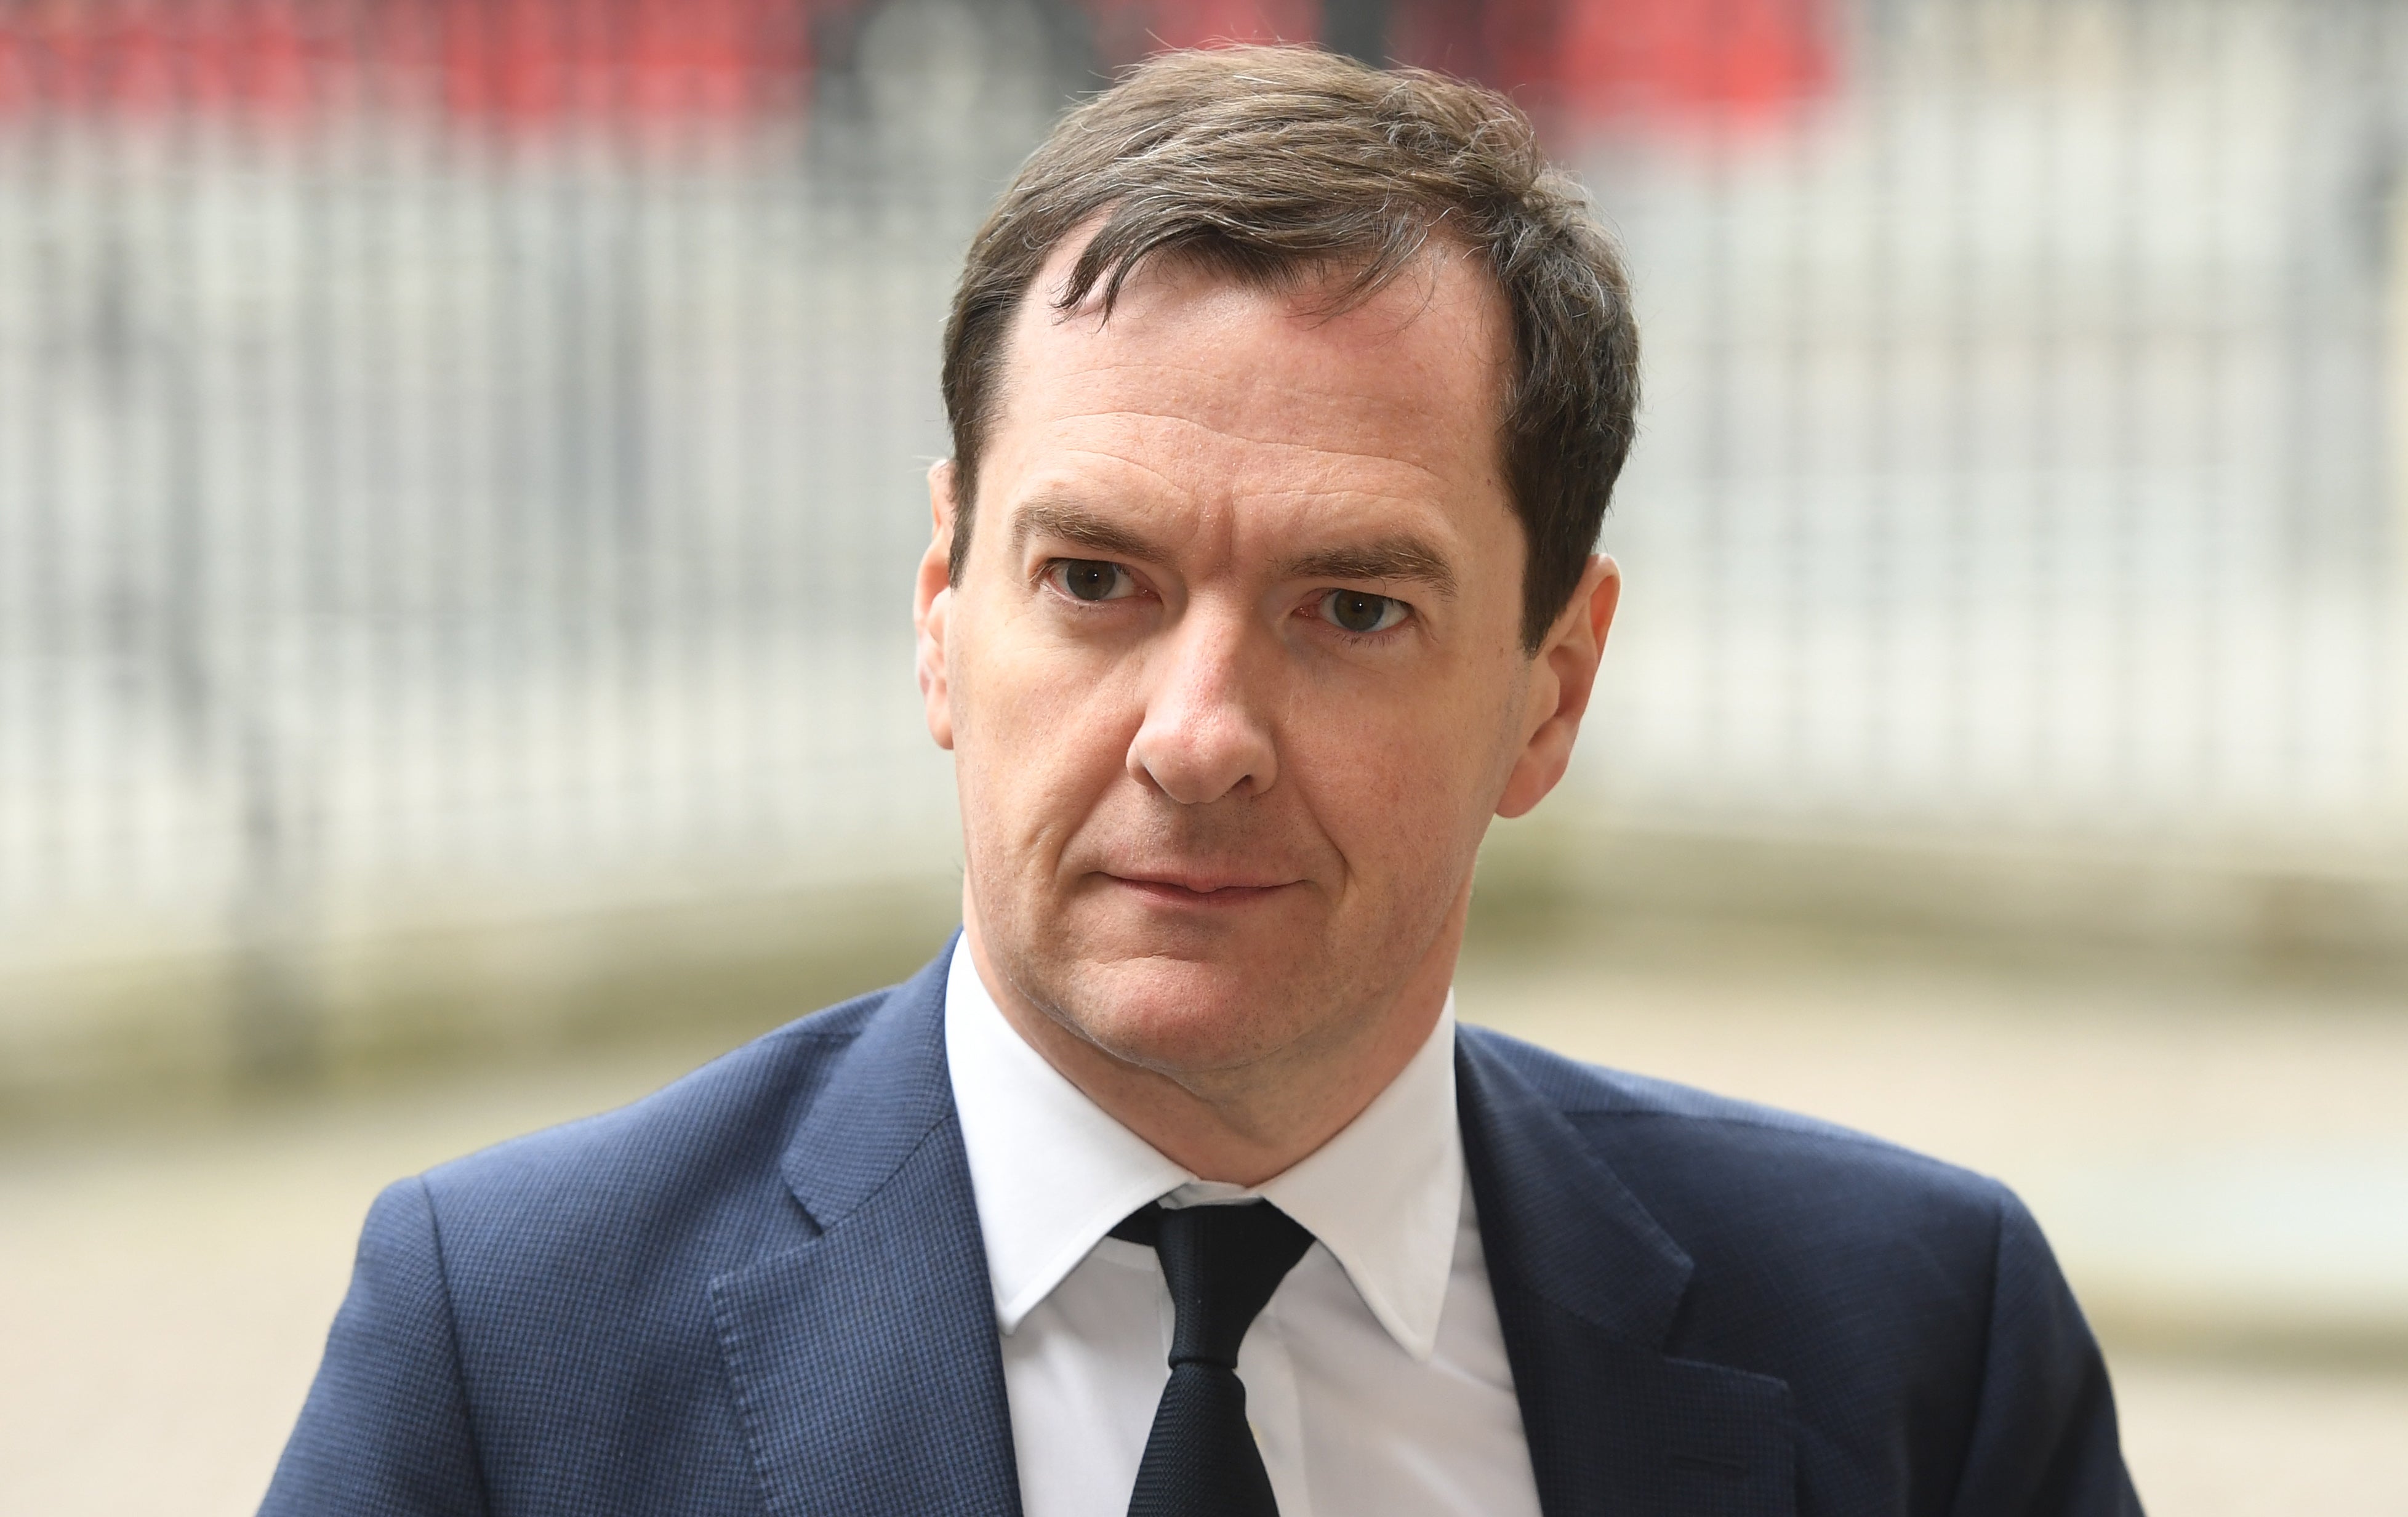 Former chancellor George Osborne is employed by investment bank Robey Warshaw